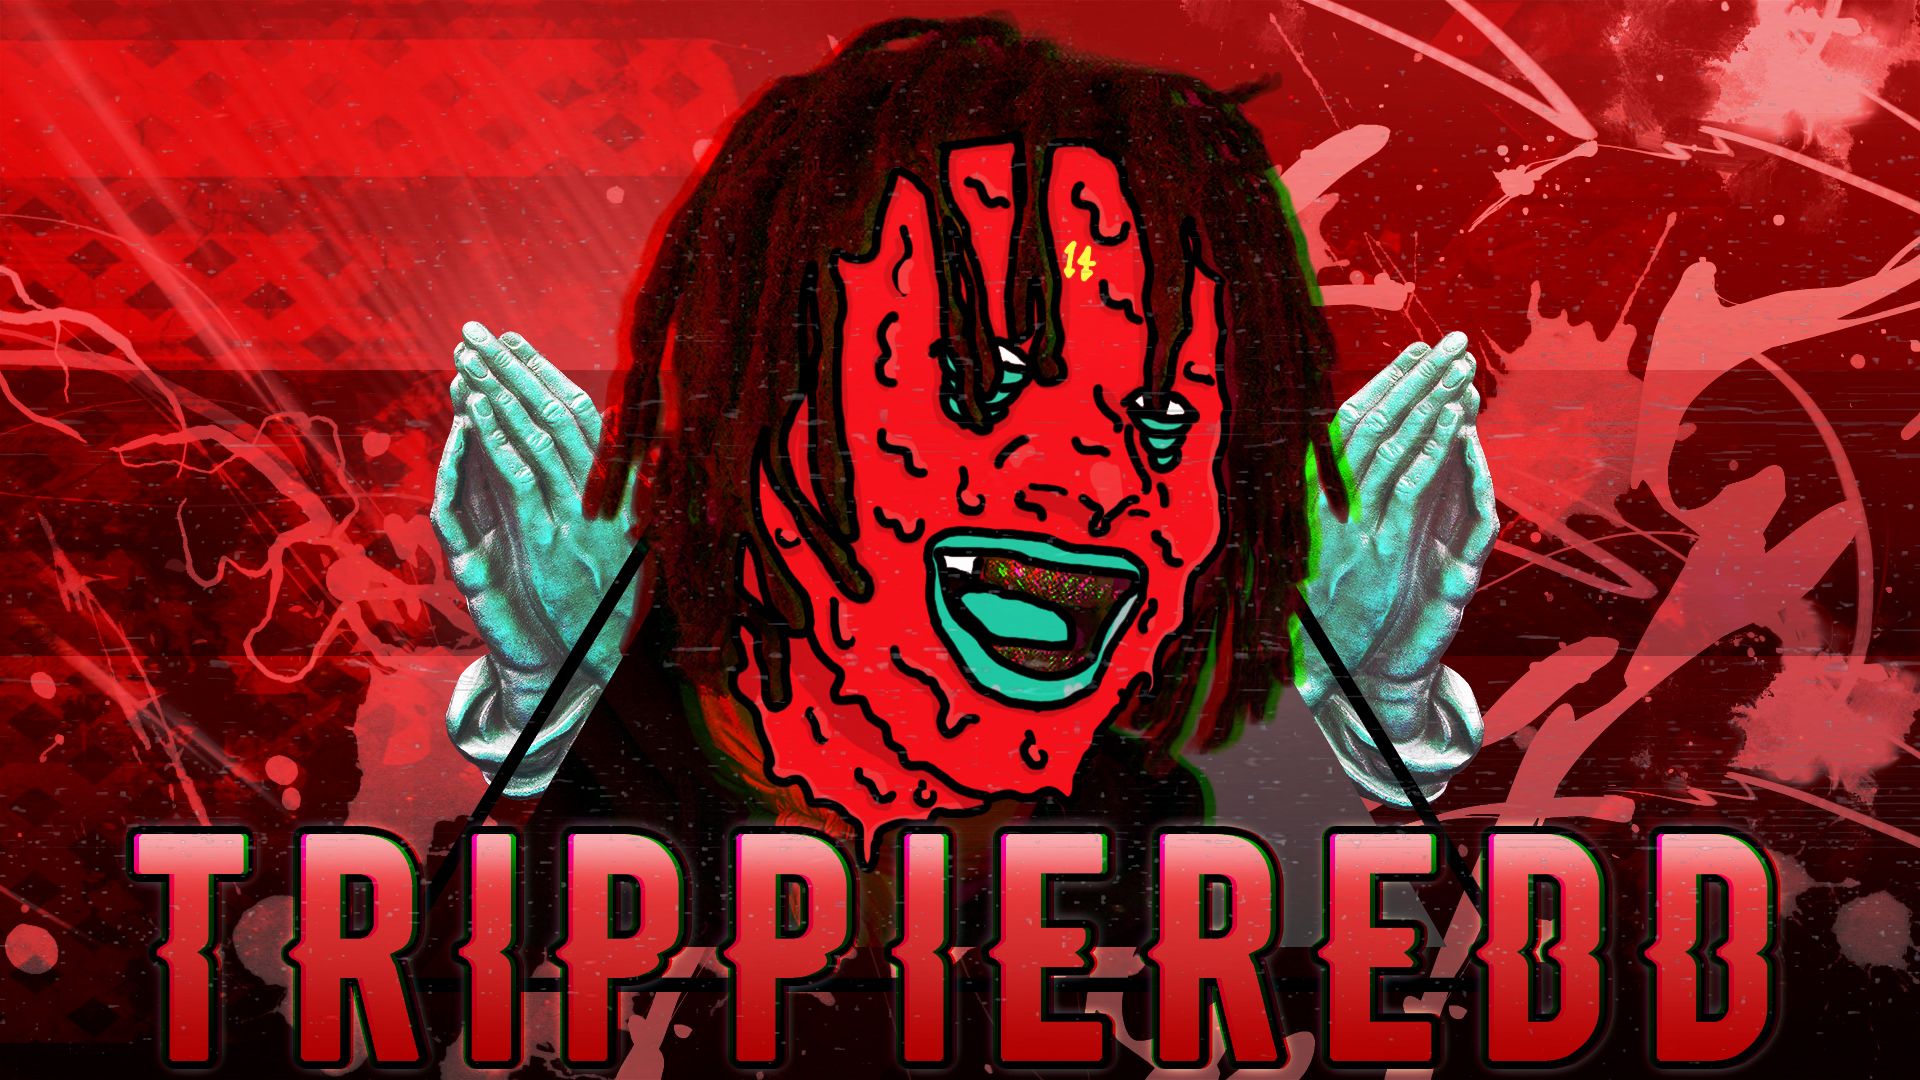 Trippieredd projects. Photo, videos, logos, illustrations and branding